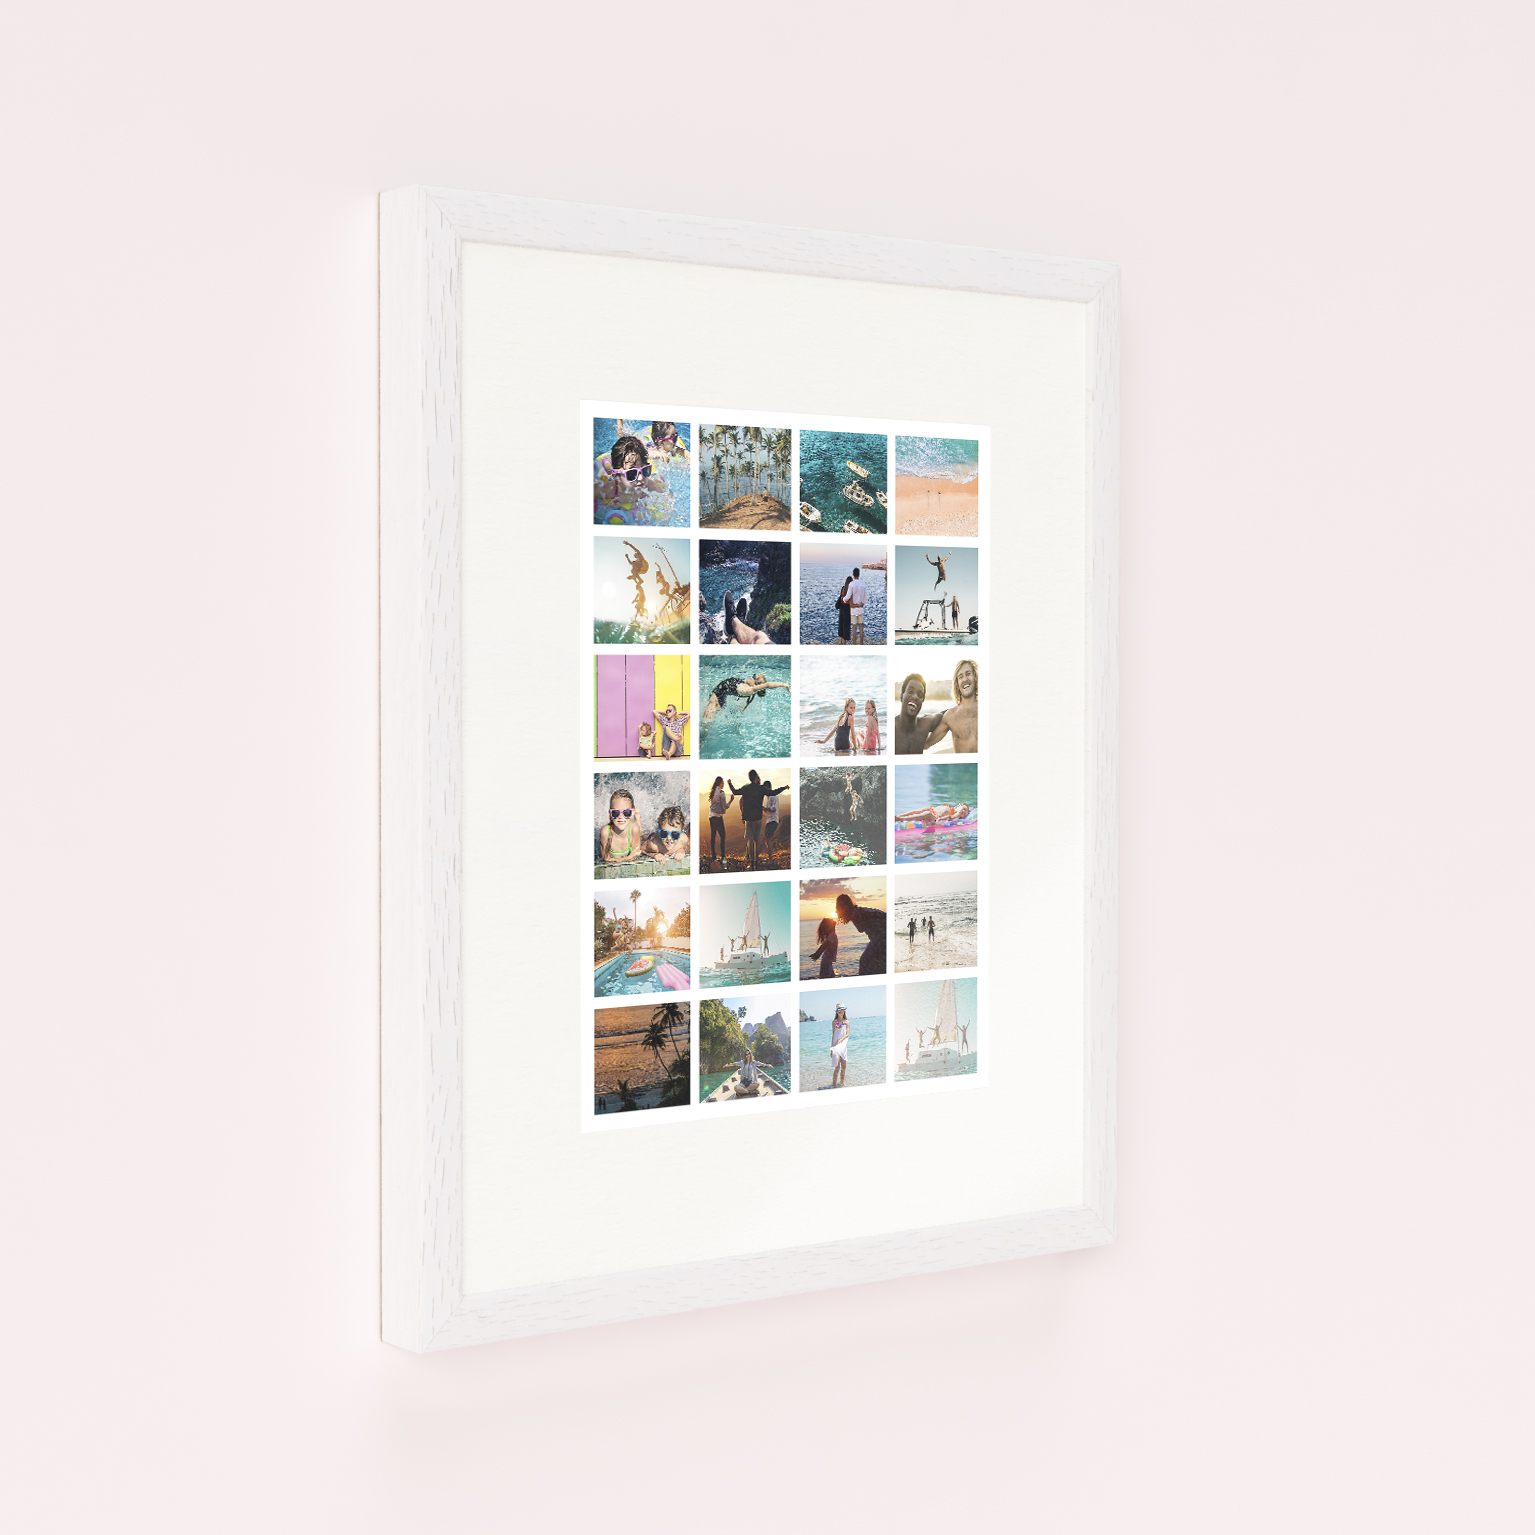 Photo of a framed photo print called 'Holiday Mosaic'. It is 40cm x 30cm in size, in a Portrait orientation. It has space for 24 photos.